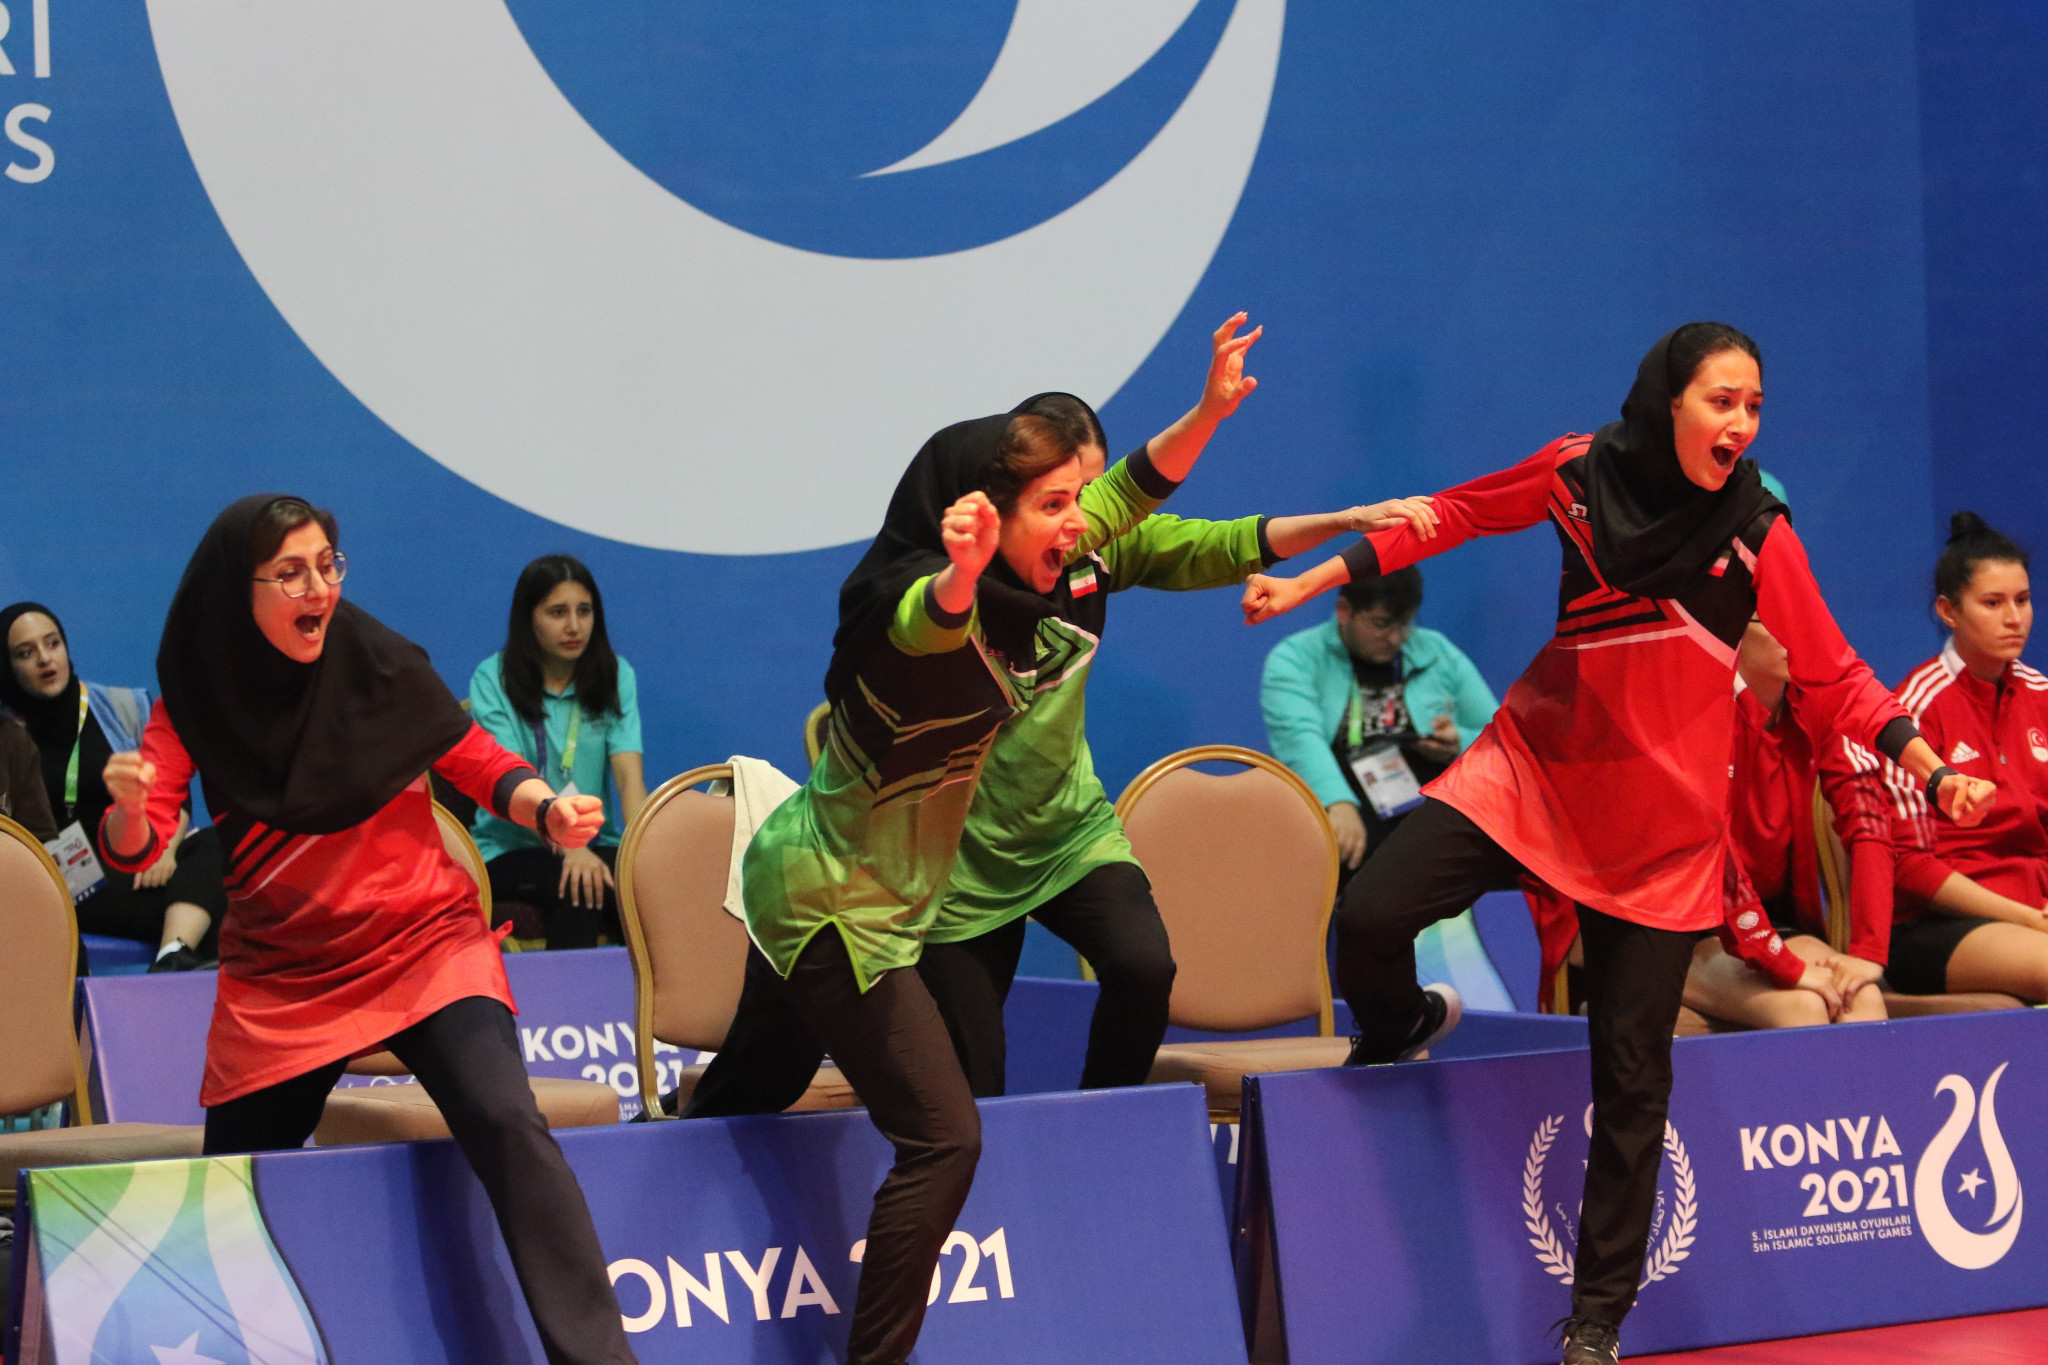 The Iranian team celebrate during the women's table tennis team finals ©Konya 2021